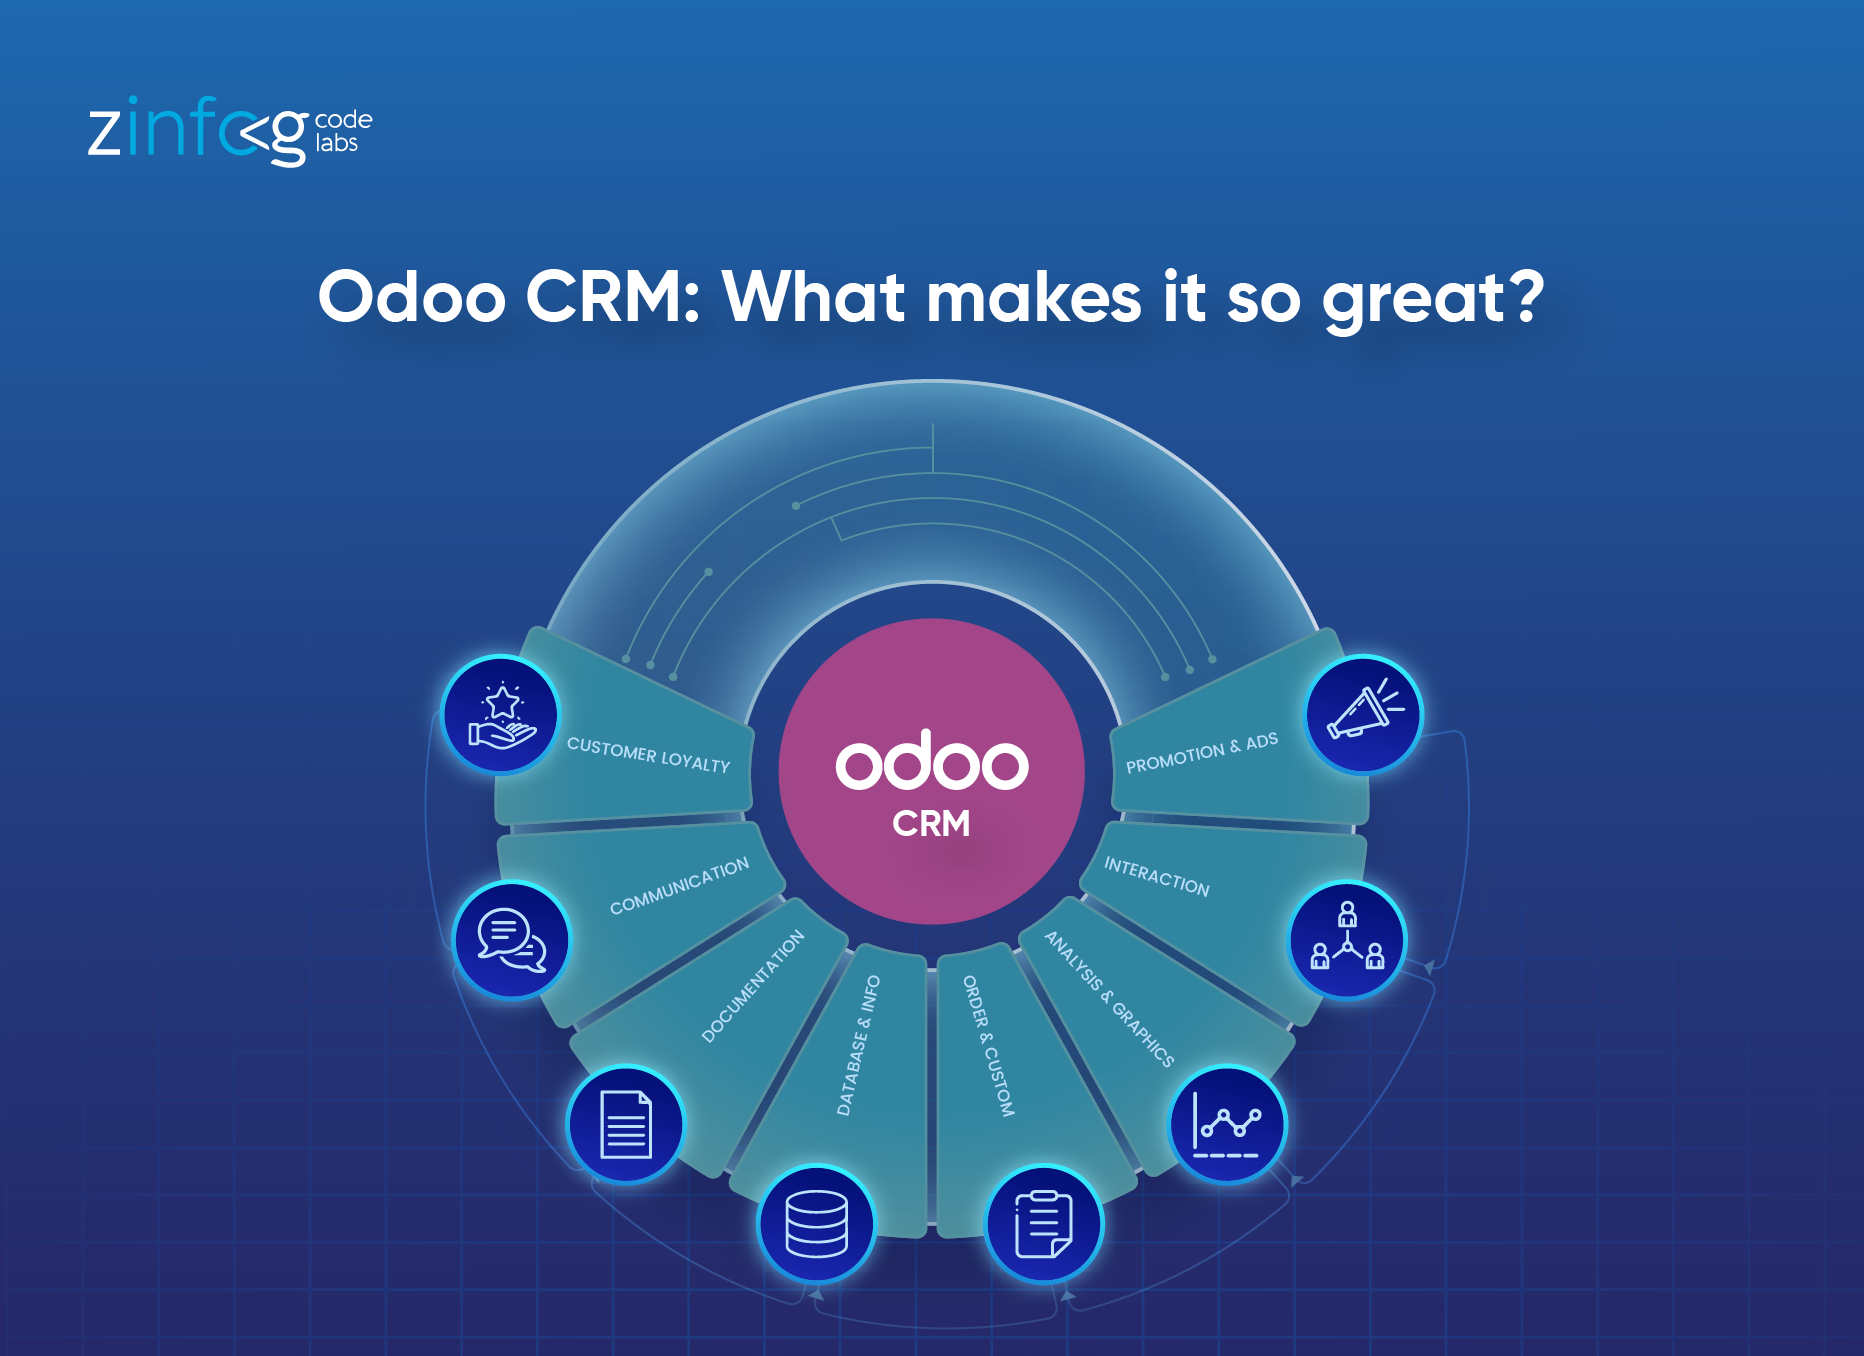 odoo-crm-what-makes-it-so-great.html